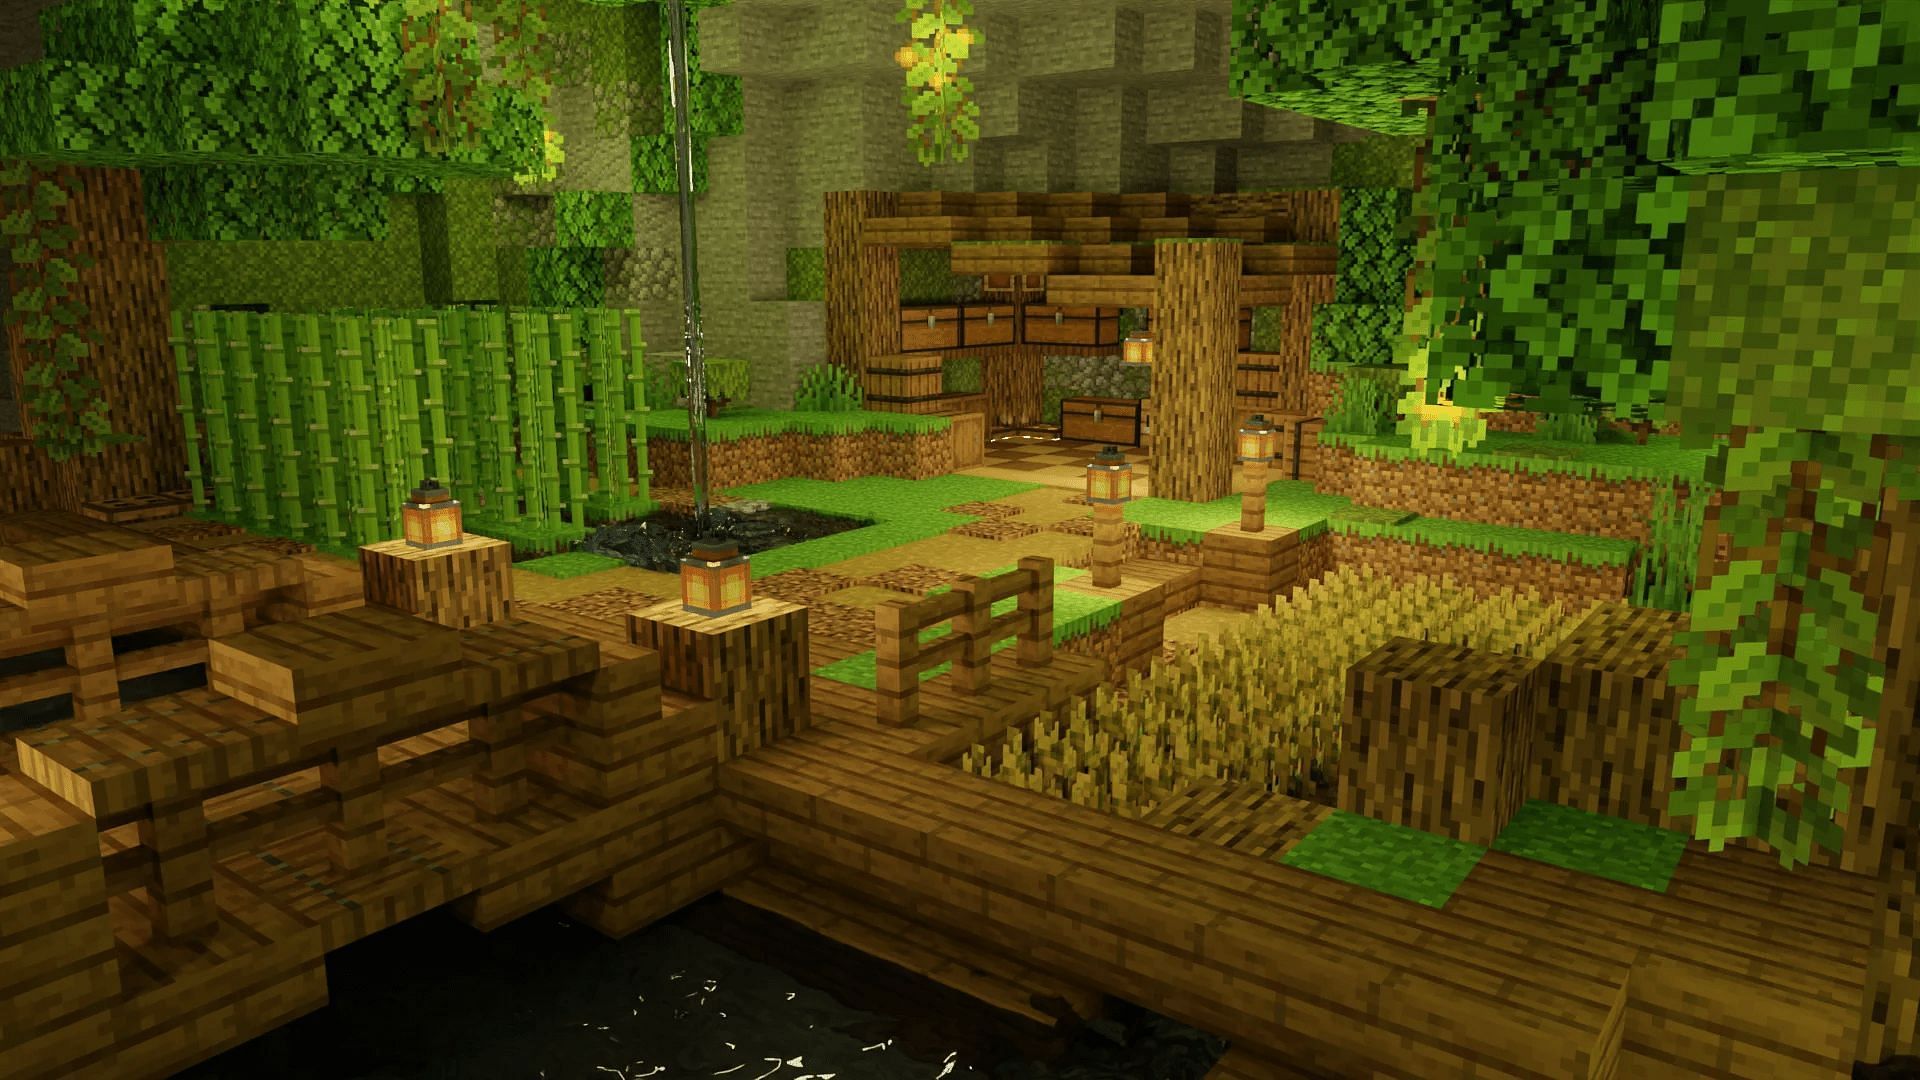 An underground Minecraft base can be heavily improved with greenery (Image via AniGoBuilds/Reddit)